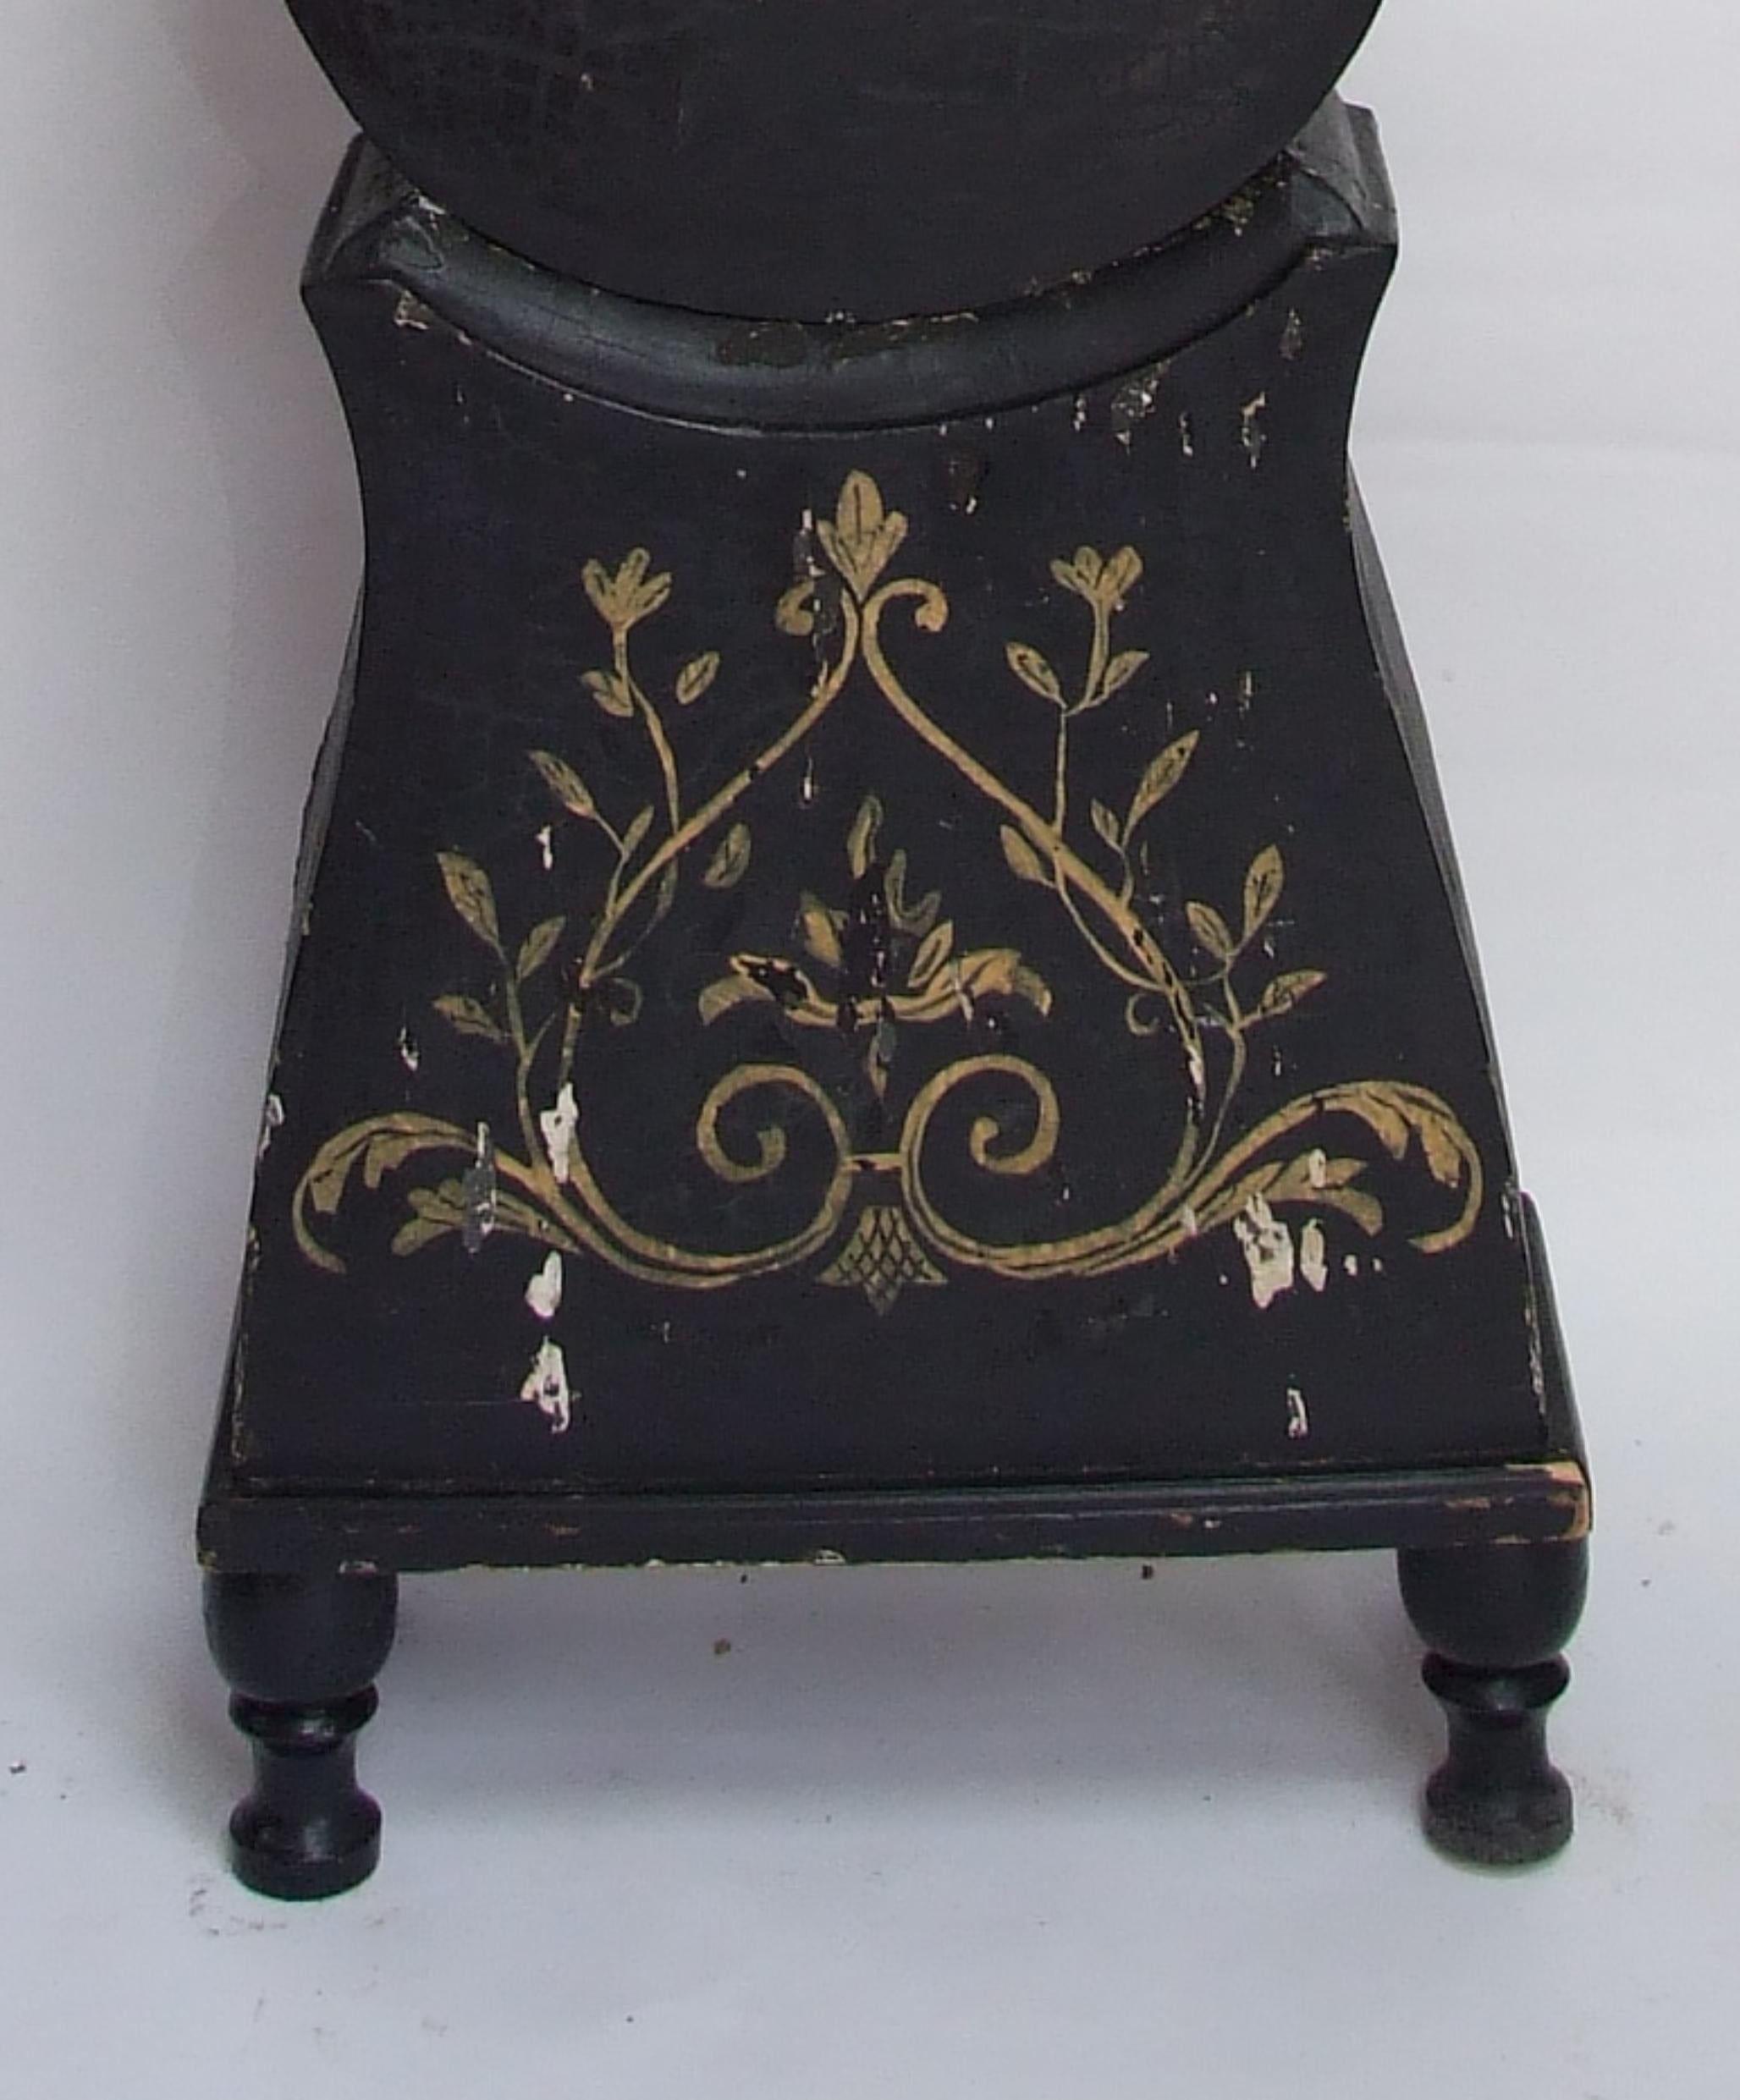 Hand-Painted Antique Swedish Black and Gold Mora Clock Early 1800s Urn Feet